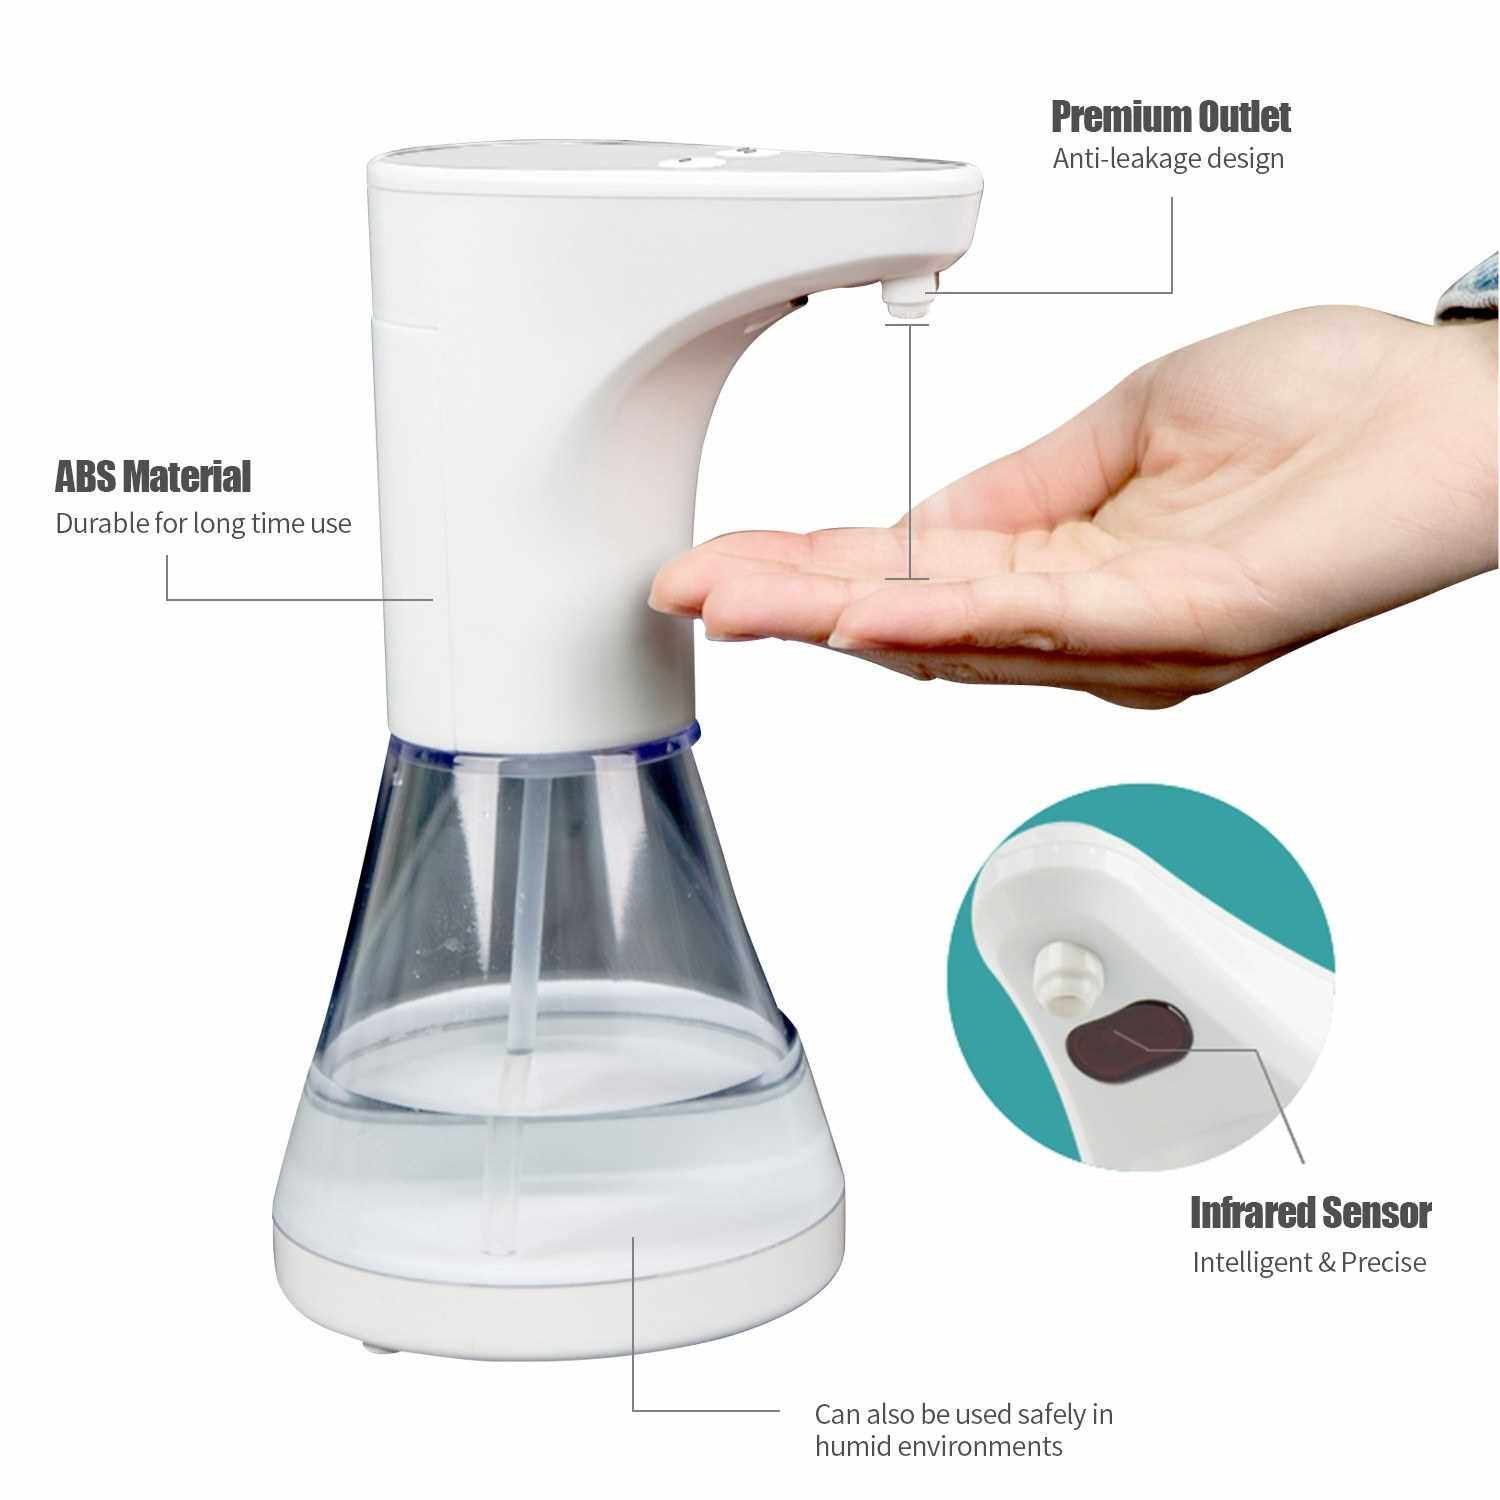 Best Selling 480mL Automatic Soap Dispenser Spray Type Touchless Soap Dispensers with IR Sensor Rinse-free Sanitizer Alcohol Disinfectant Dispenser for Home Commercial Use Hospitals (Standard)